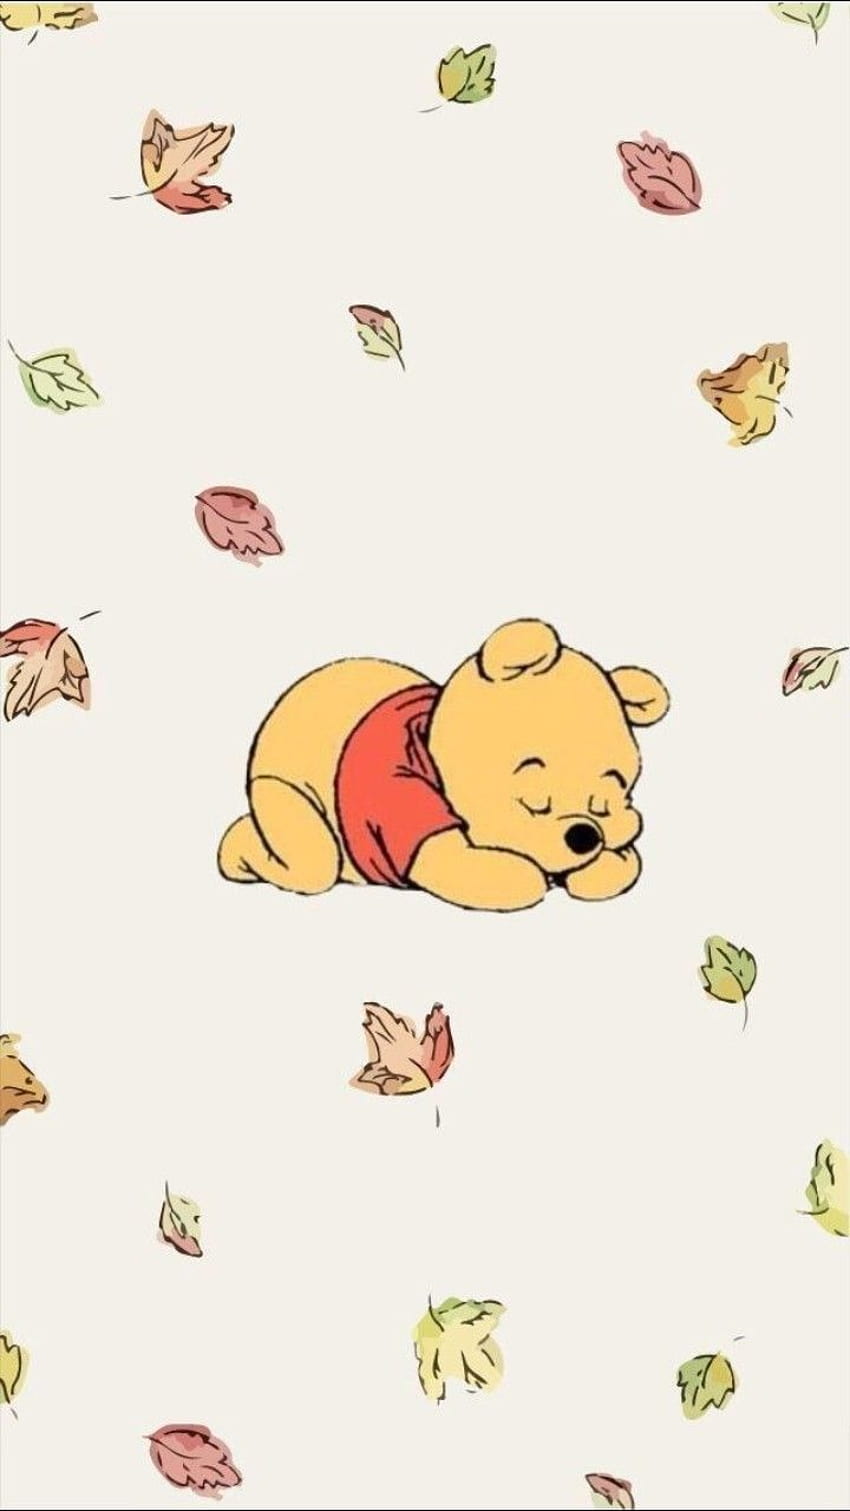 2560x1600  2560x1600 winnie pooh wallpaper free hd widescreen   Coolwallpapersme